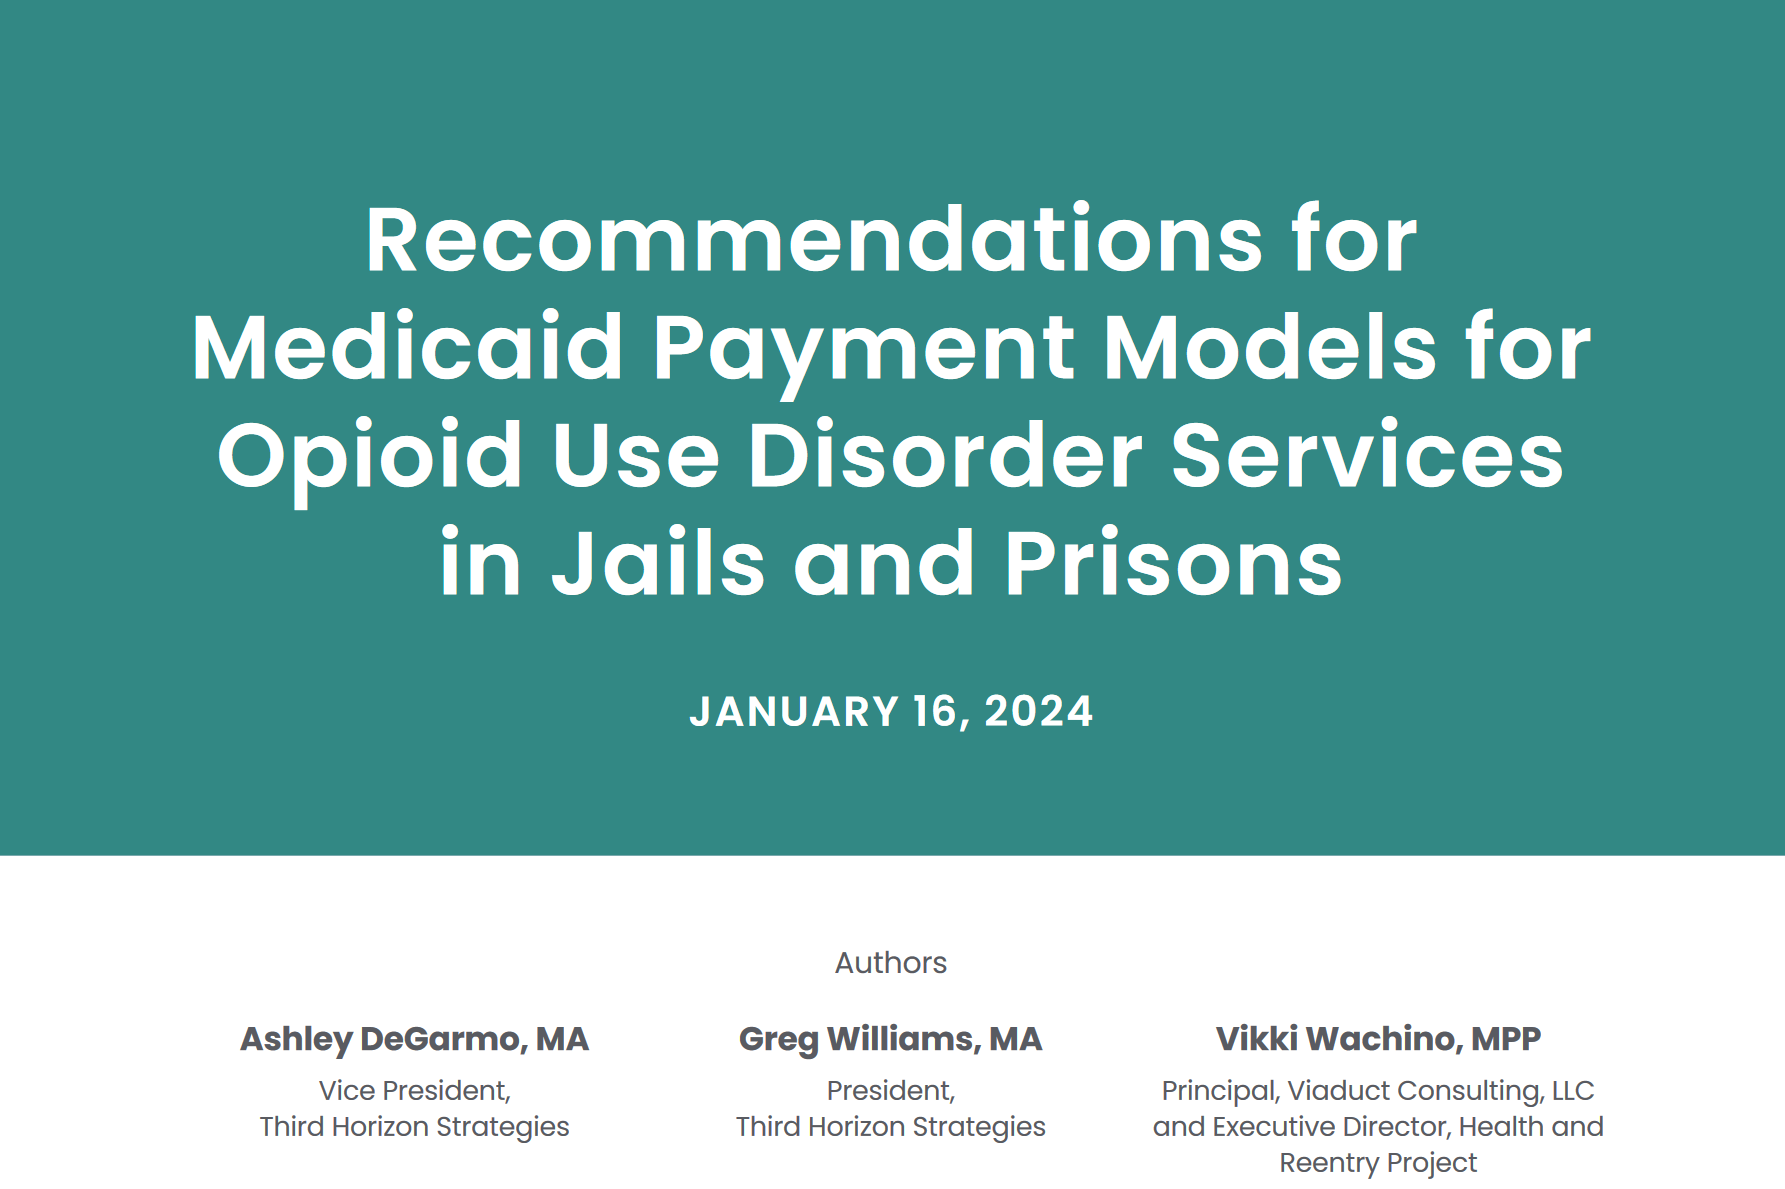 New Report Outlines Recommendations for Medicaid Coverage of OUD Services in Jails and Prisons